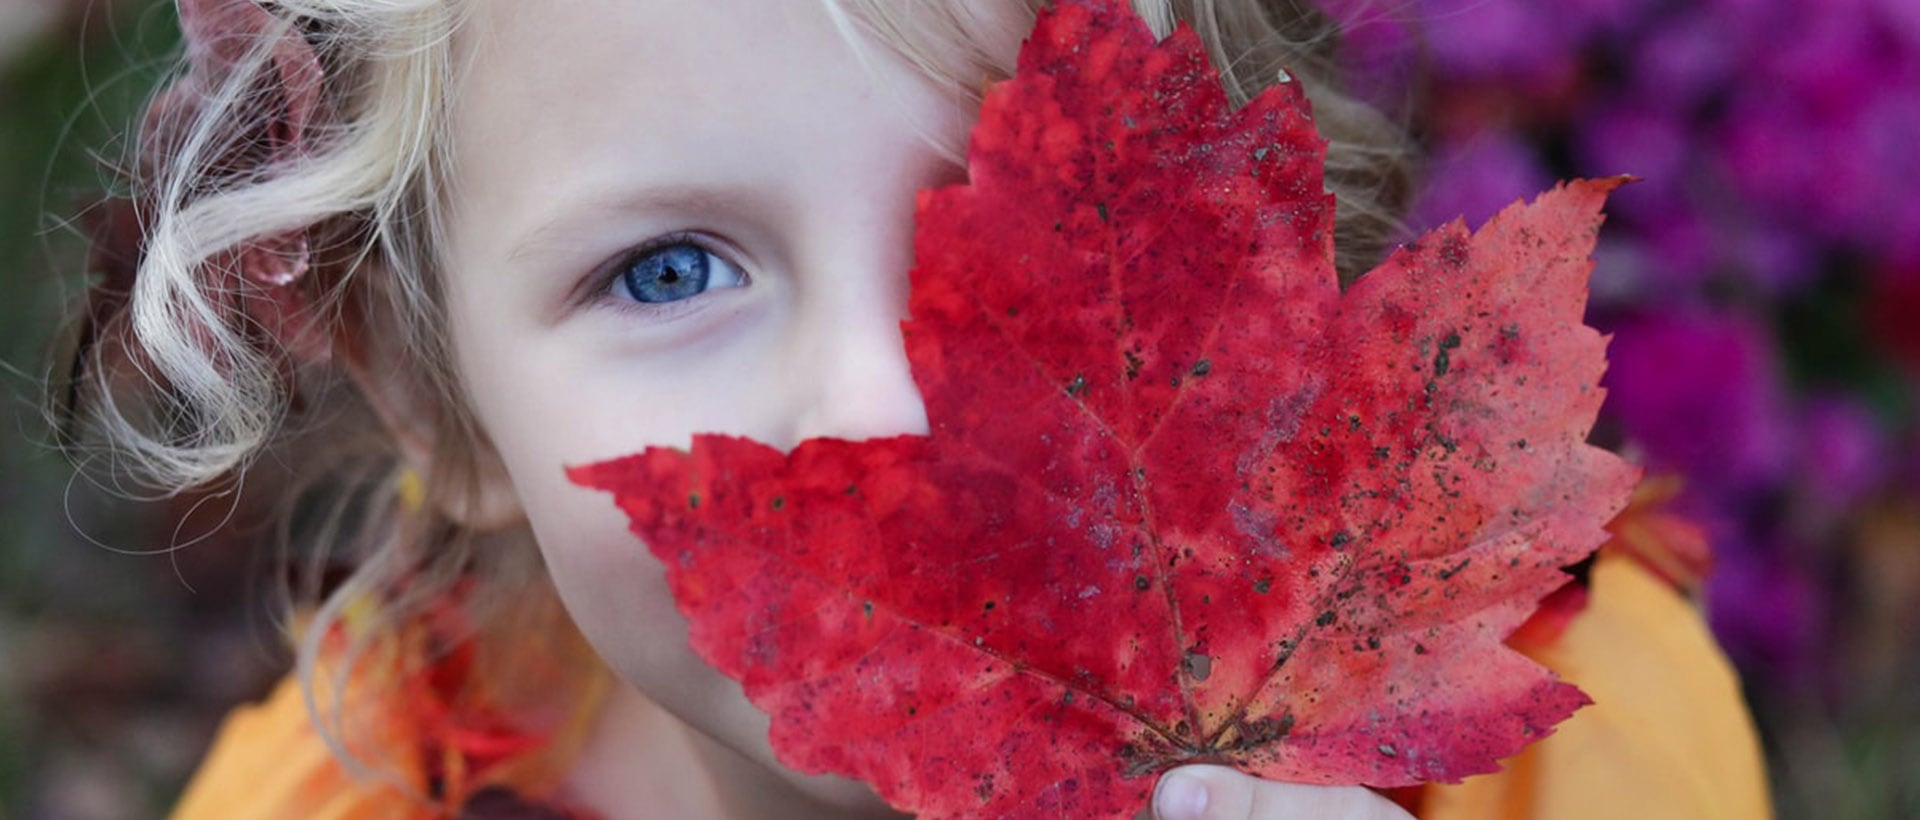 A young girl covering part of her face with a red maple leaf